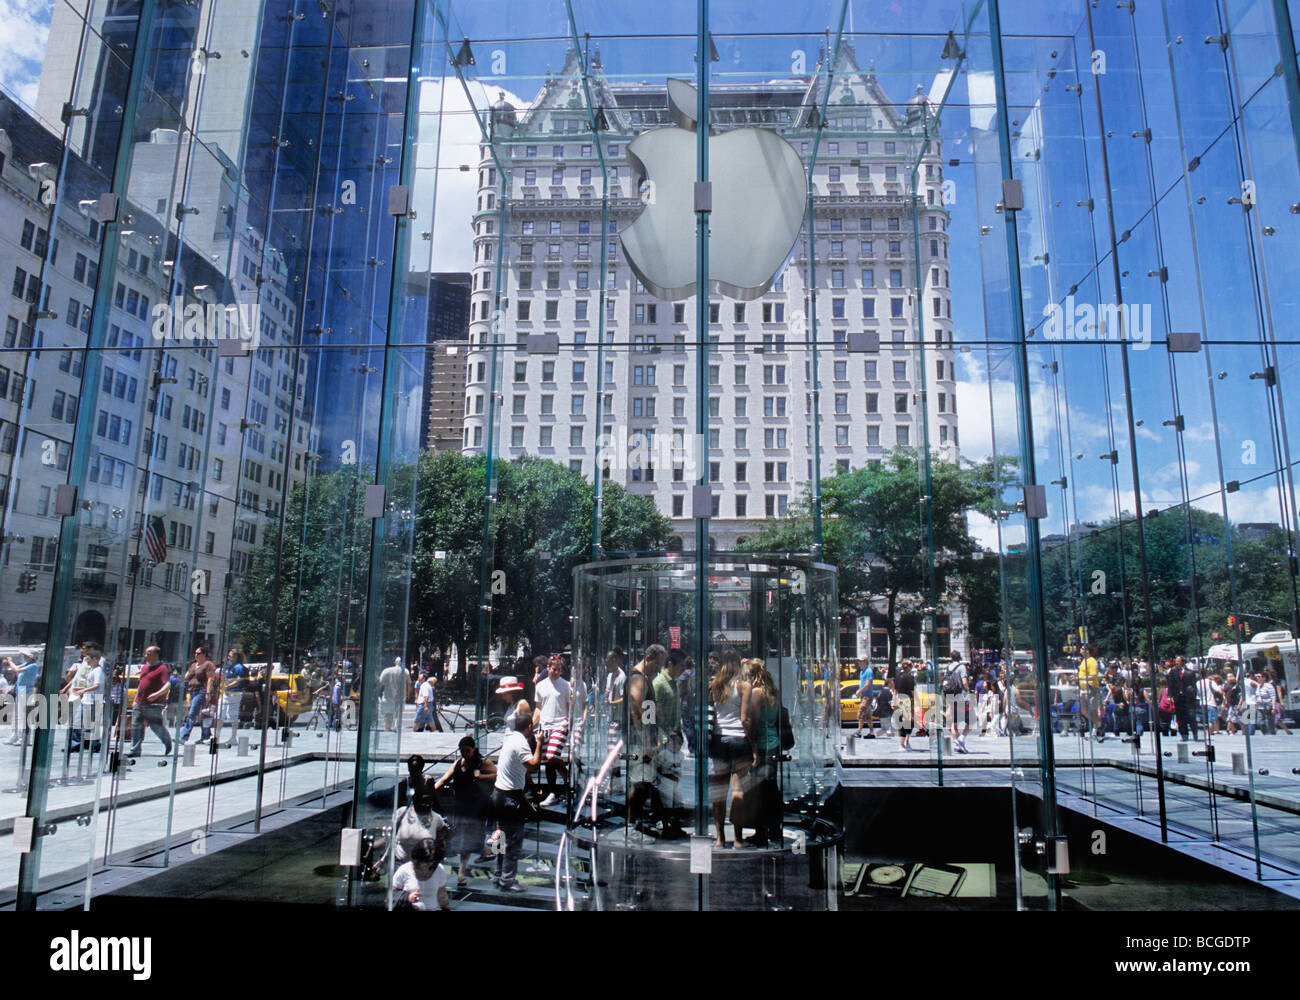 New York City, the Apple Store the Plaza Hotel, Bergdorf Goodman and The Grand Army Plaza on 5th Avenue in Midtown Manhattan. Street scene NYC USA Stock Photo